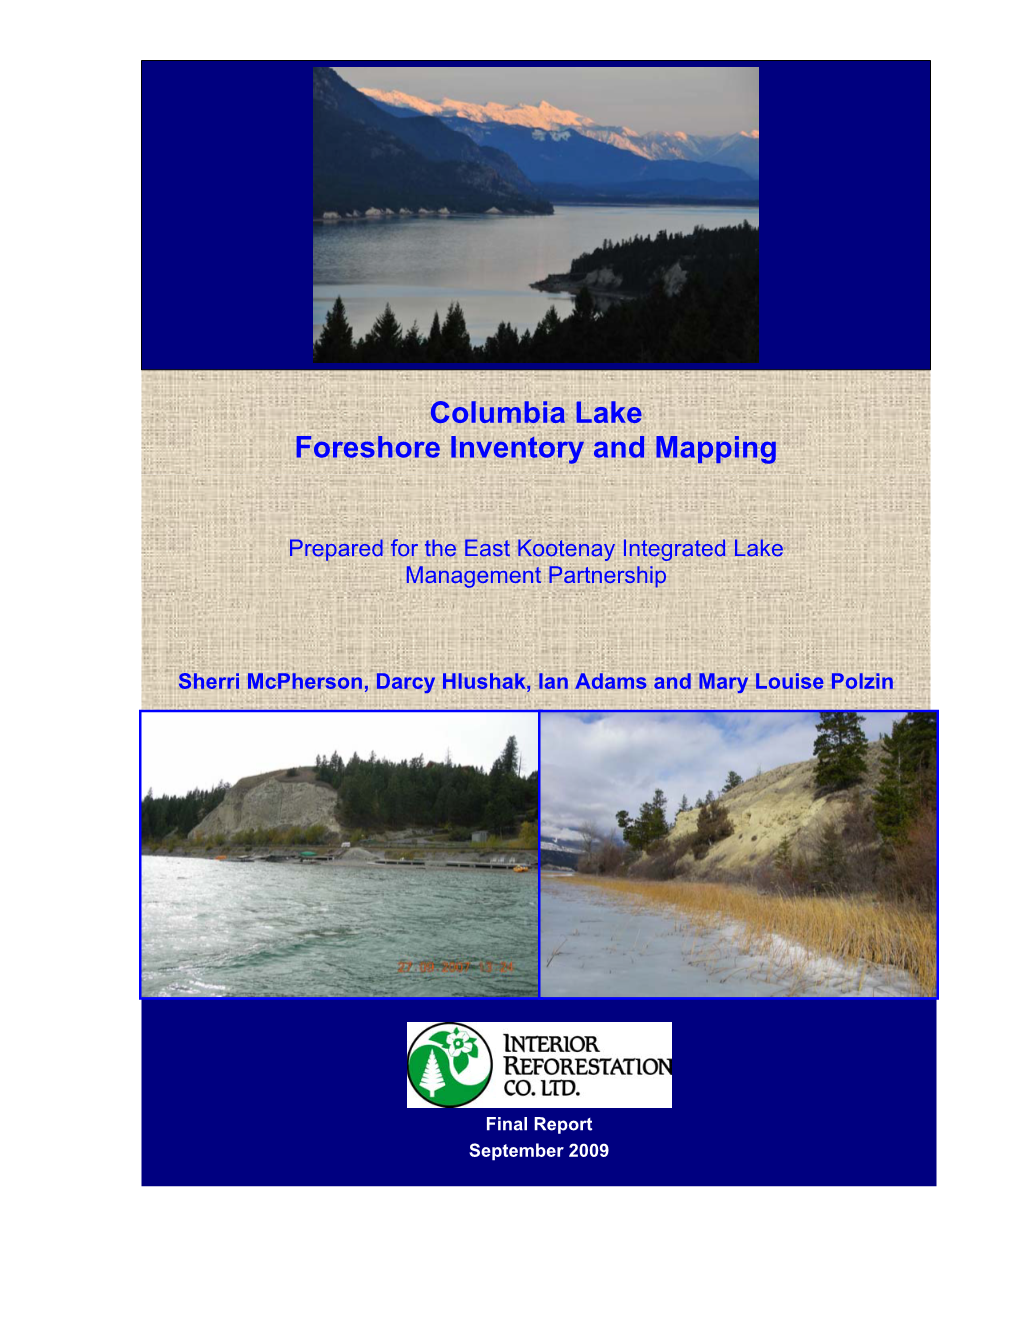 Columbia Lake Foreshore Inventory and Mapping